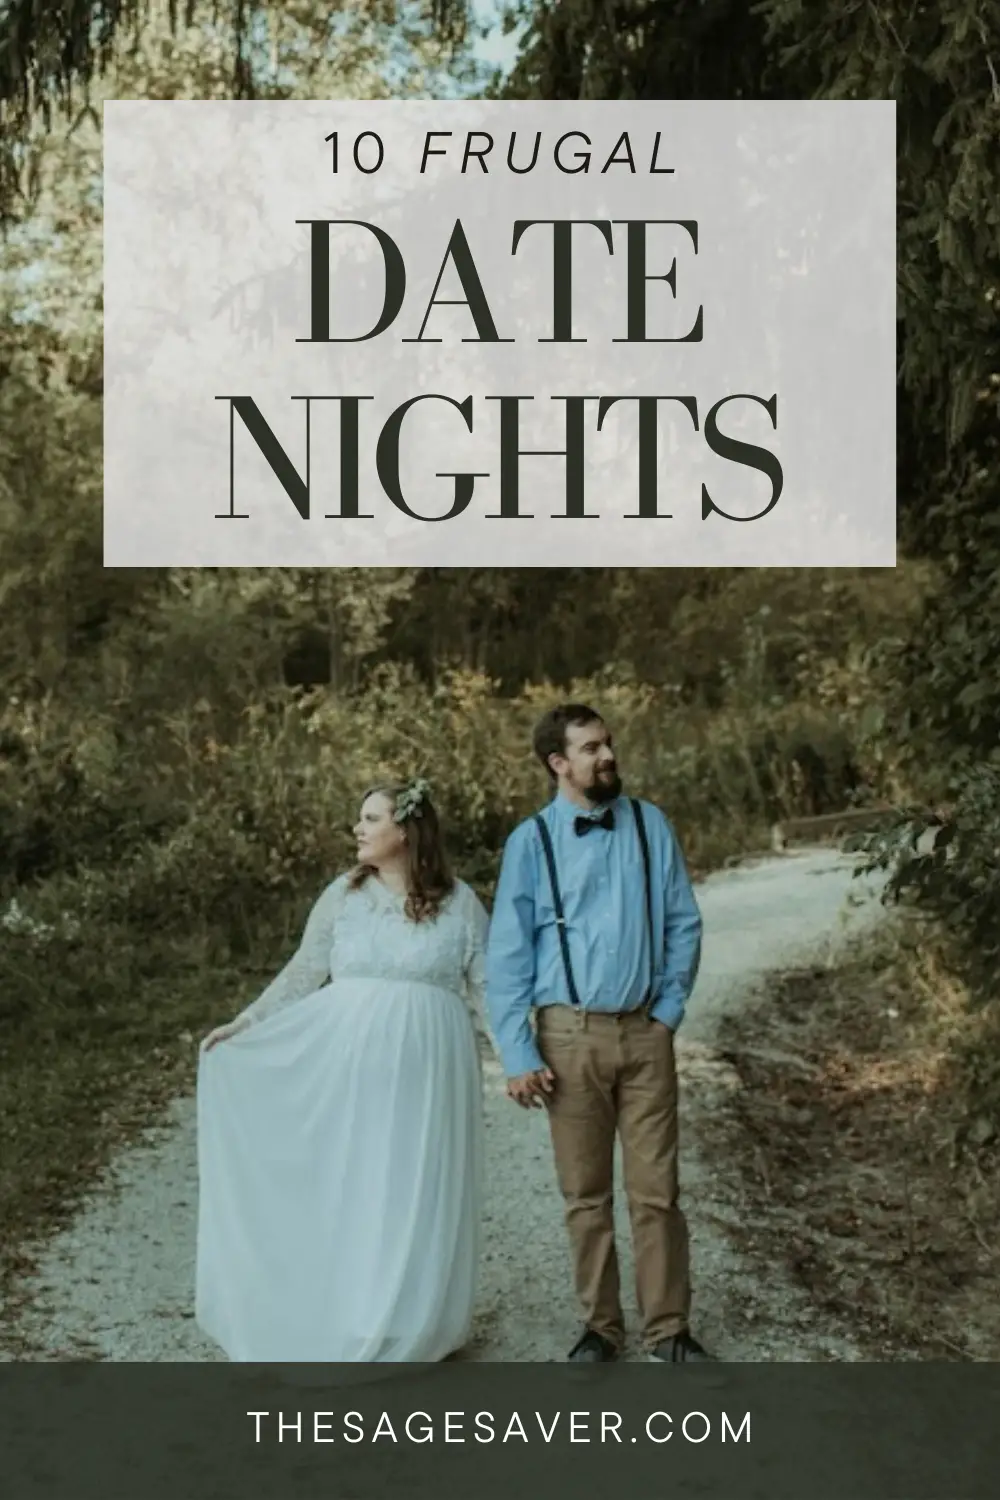 10 Frugal Date Night Ideas That You’ll Love